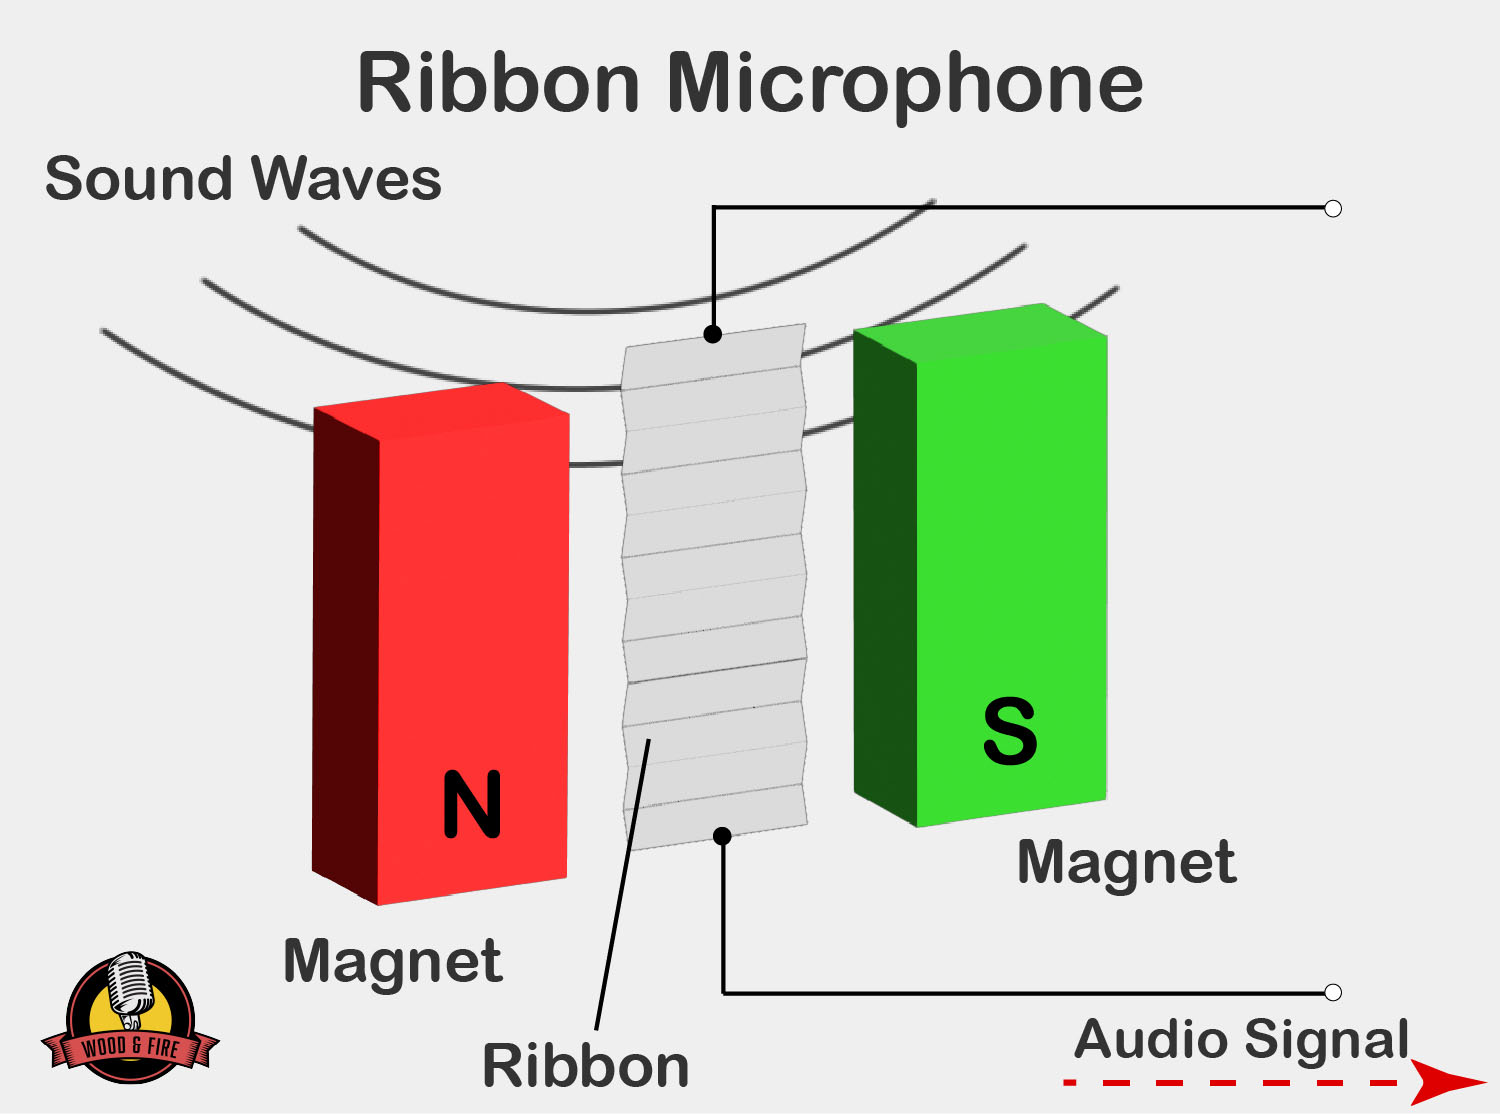 How a ribbon microphone works